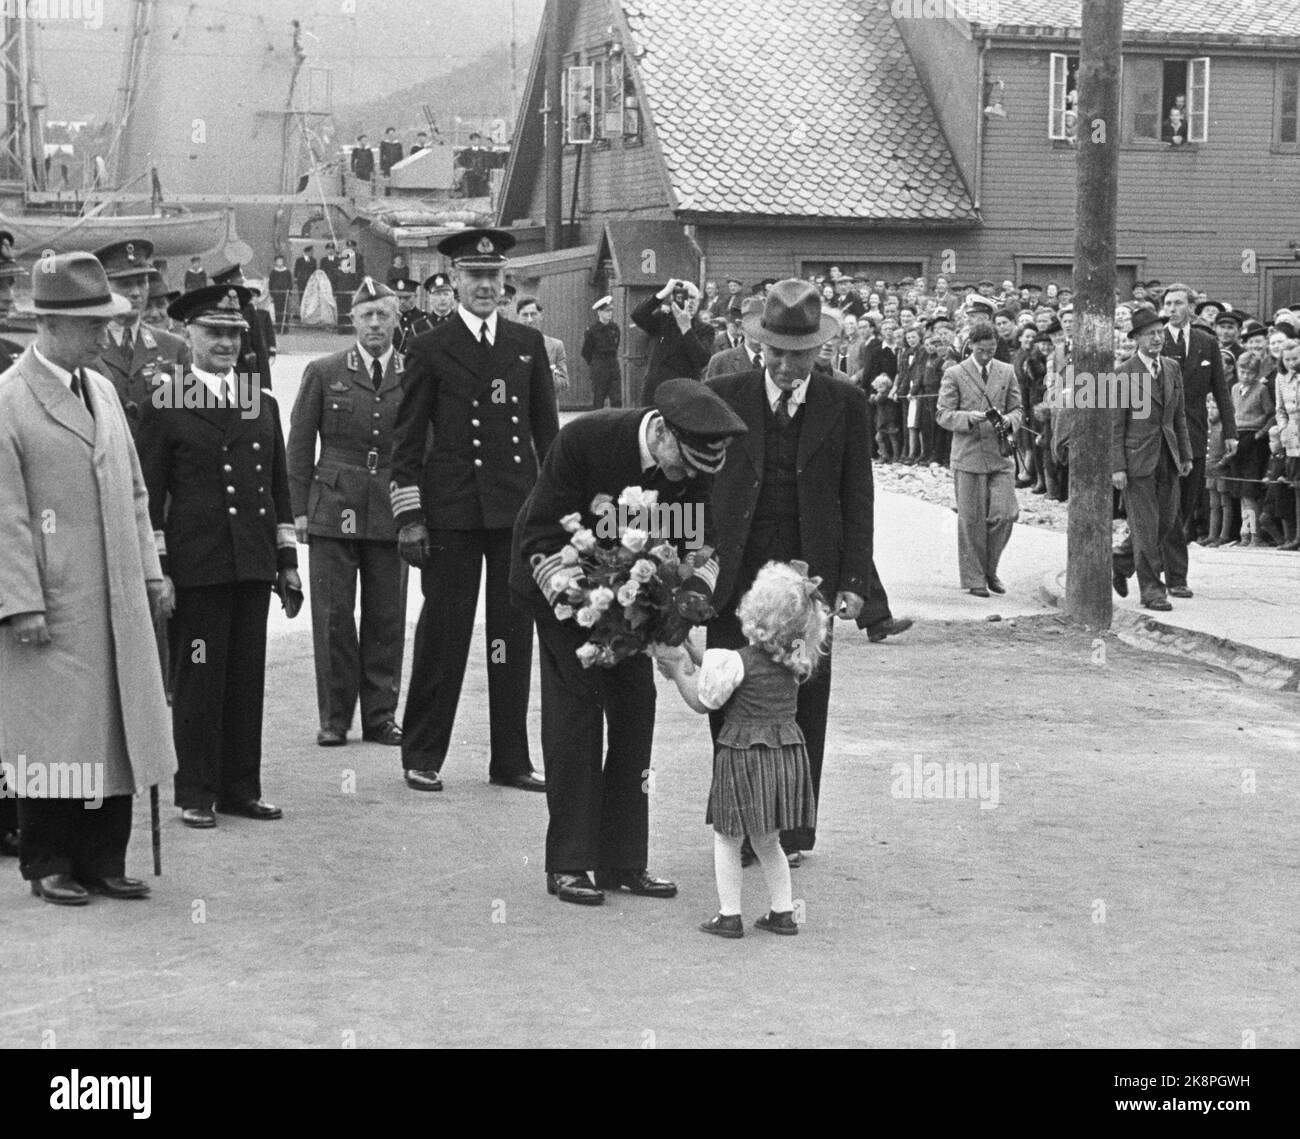 Tromsø 194607. King Haakon visits Tromsø to look at the recovery of the city after World War II. Here King Haakon receives flowers from a little girl. Photo: NTB Archive / NTB Stock Photo